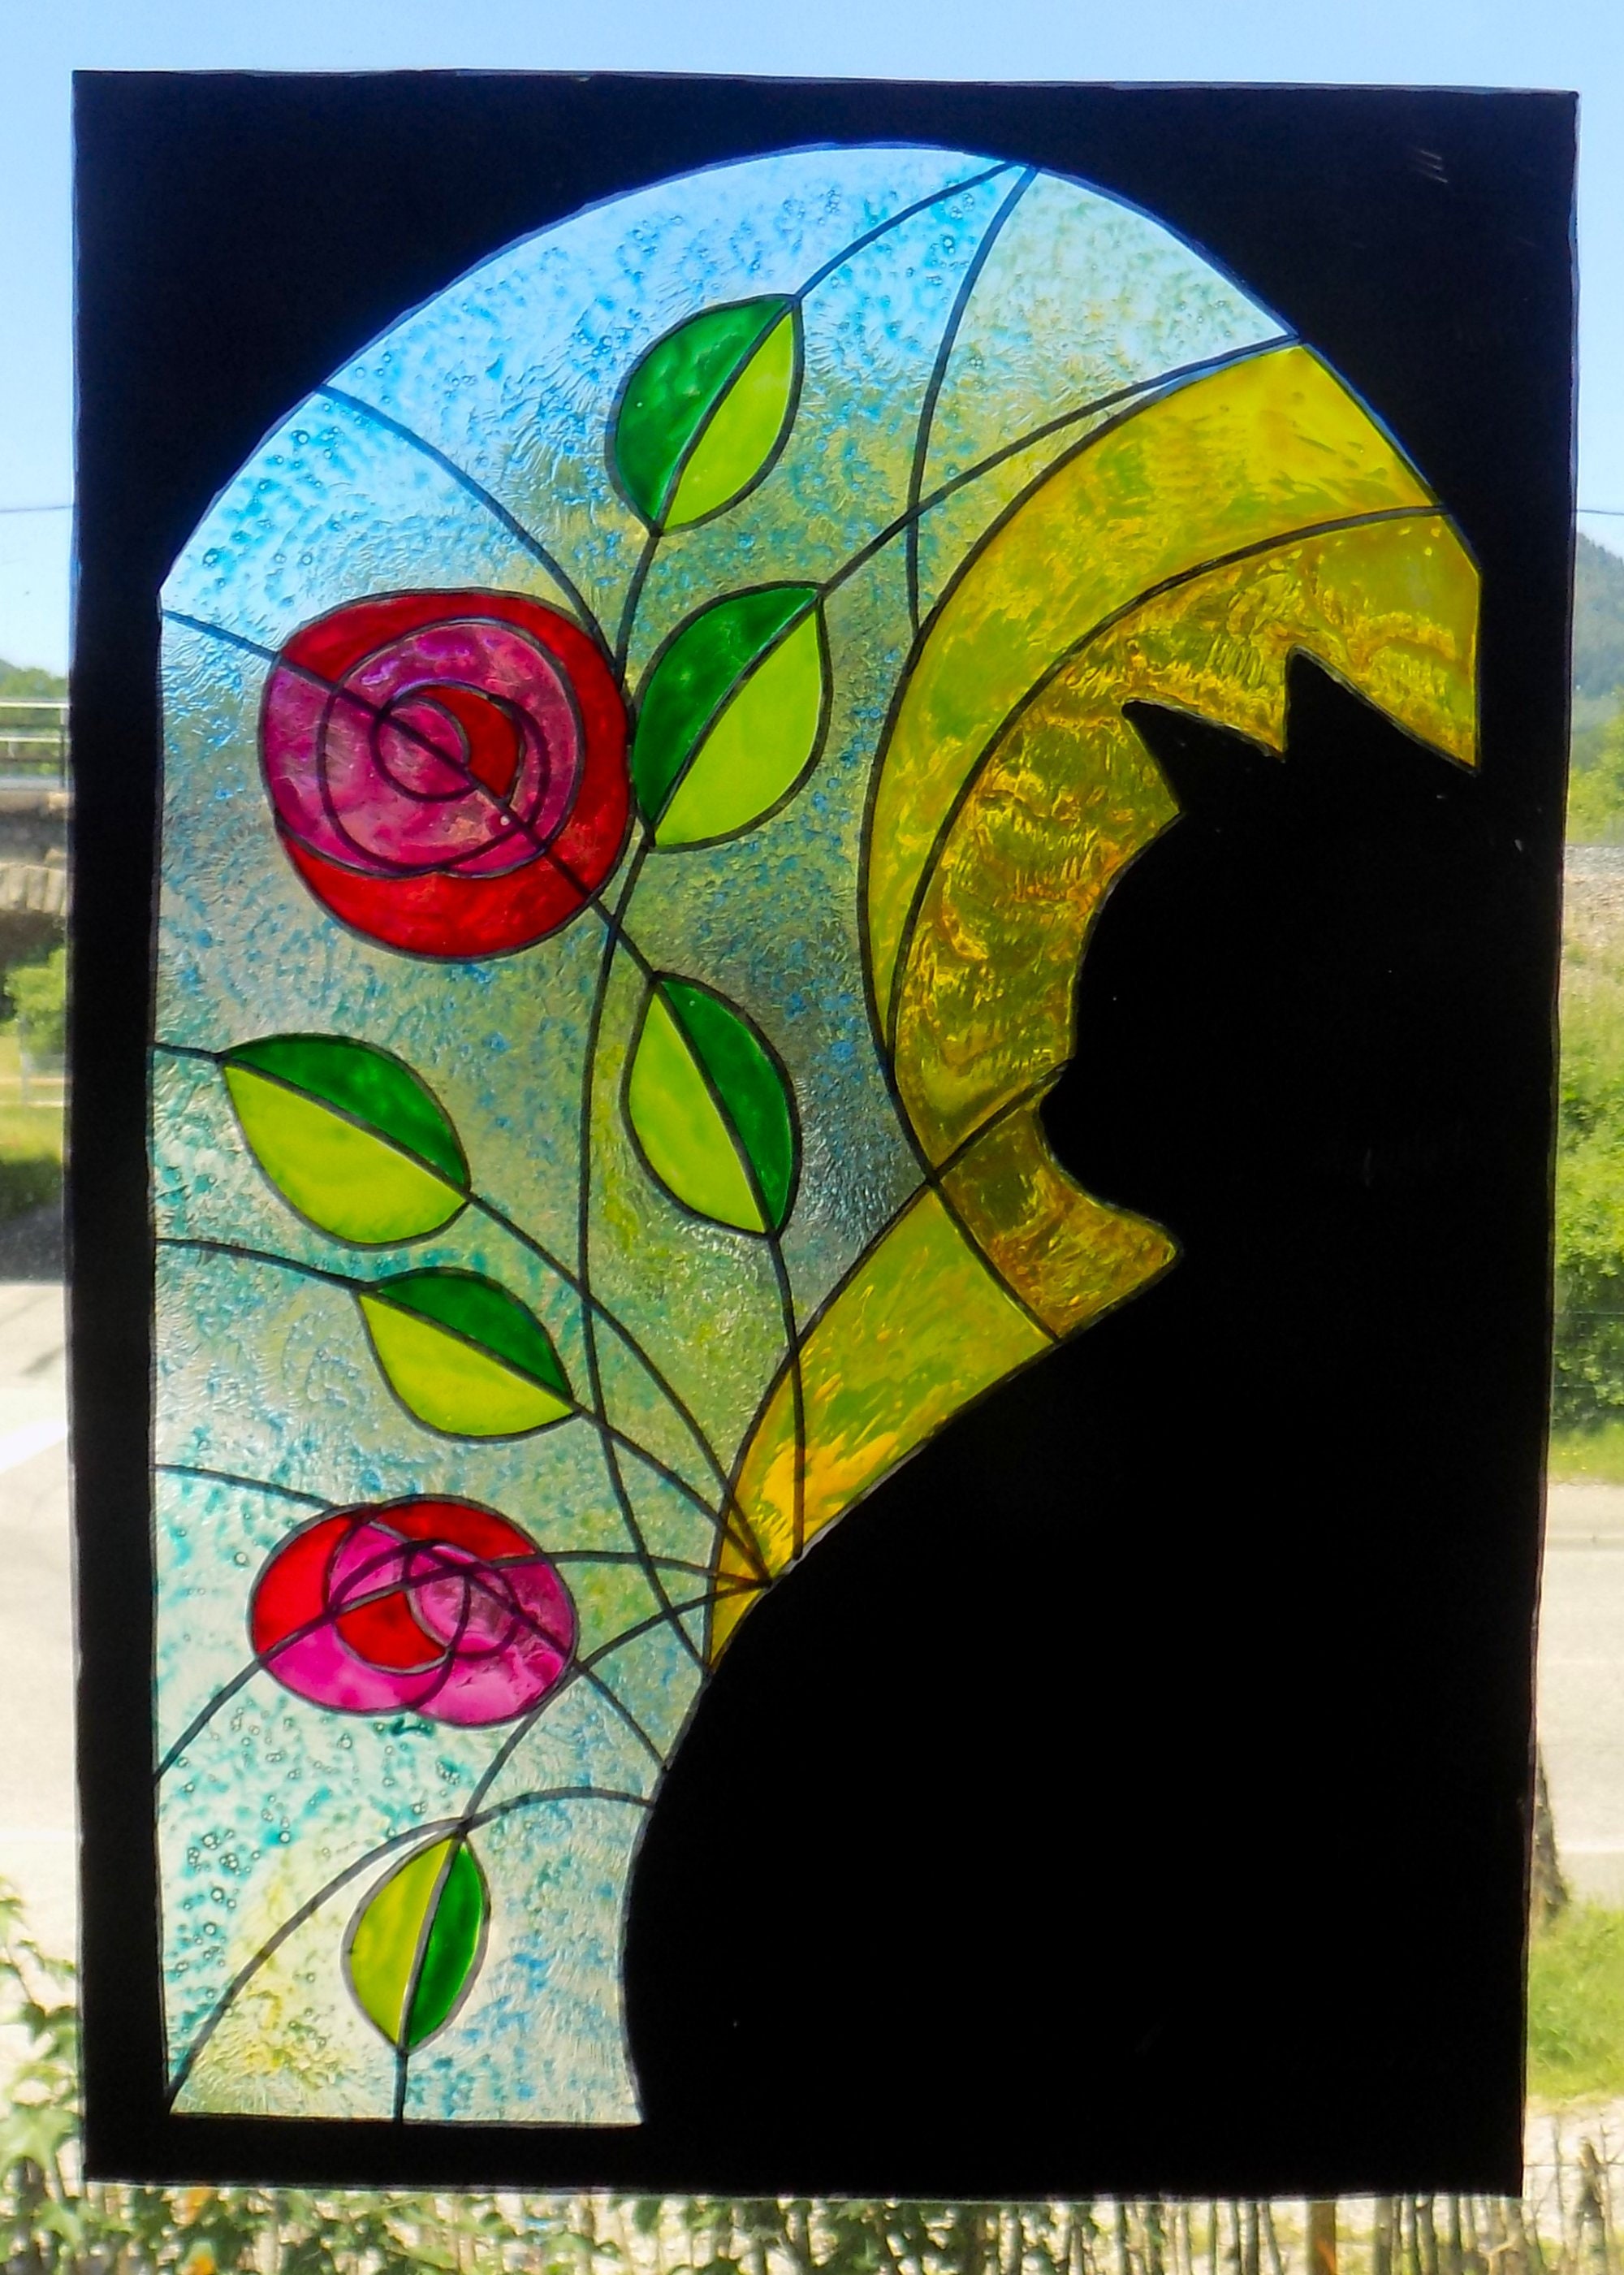 Wicoart Sticker Window Color Cling Vitrail Stained Glass Decal Handpainted Chat et Roses